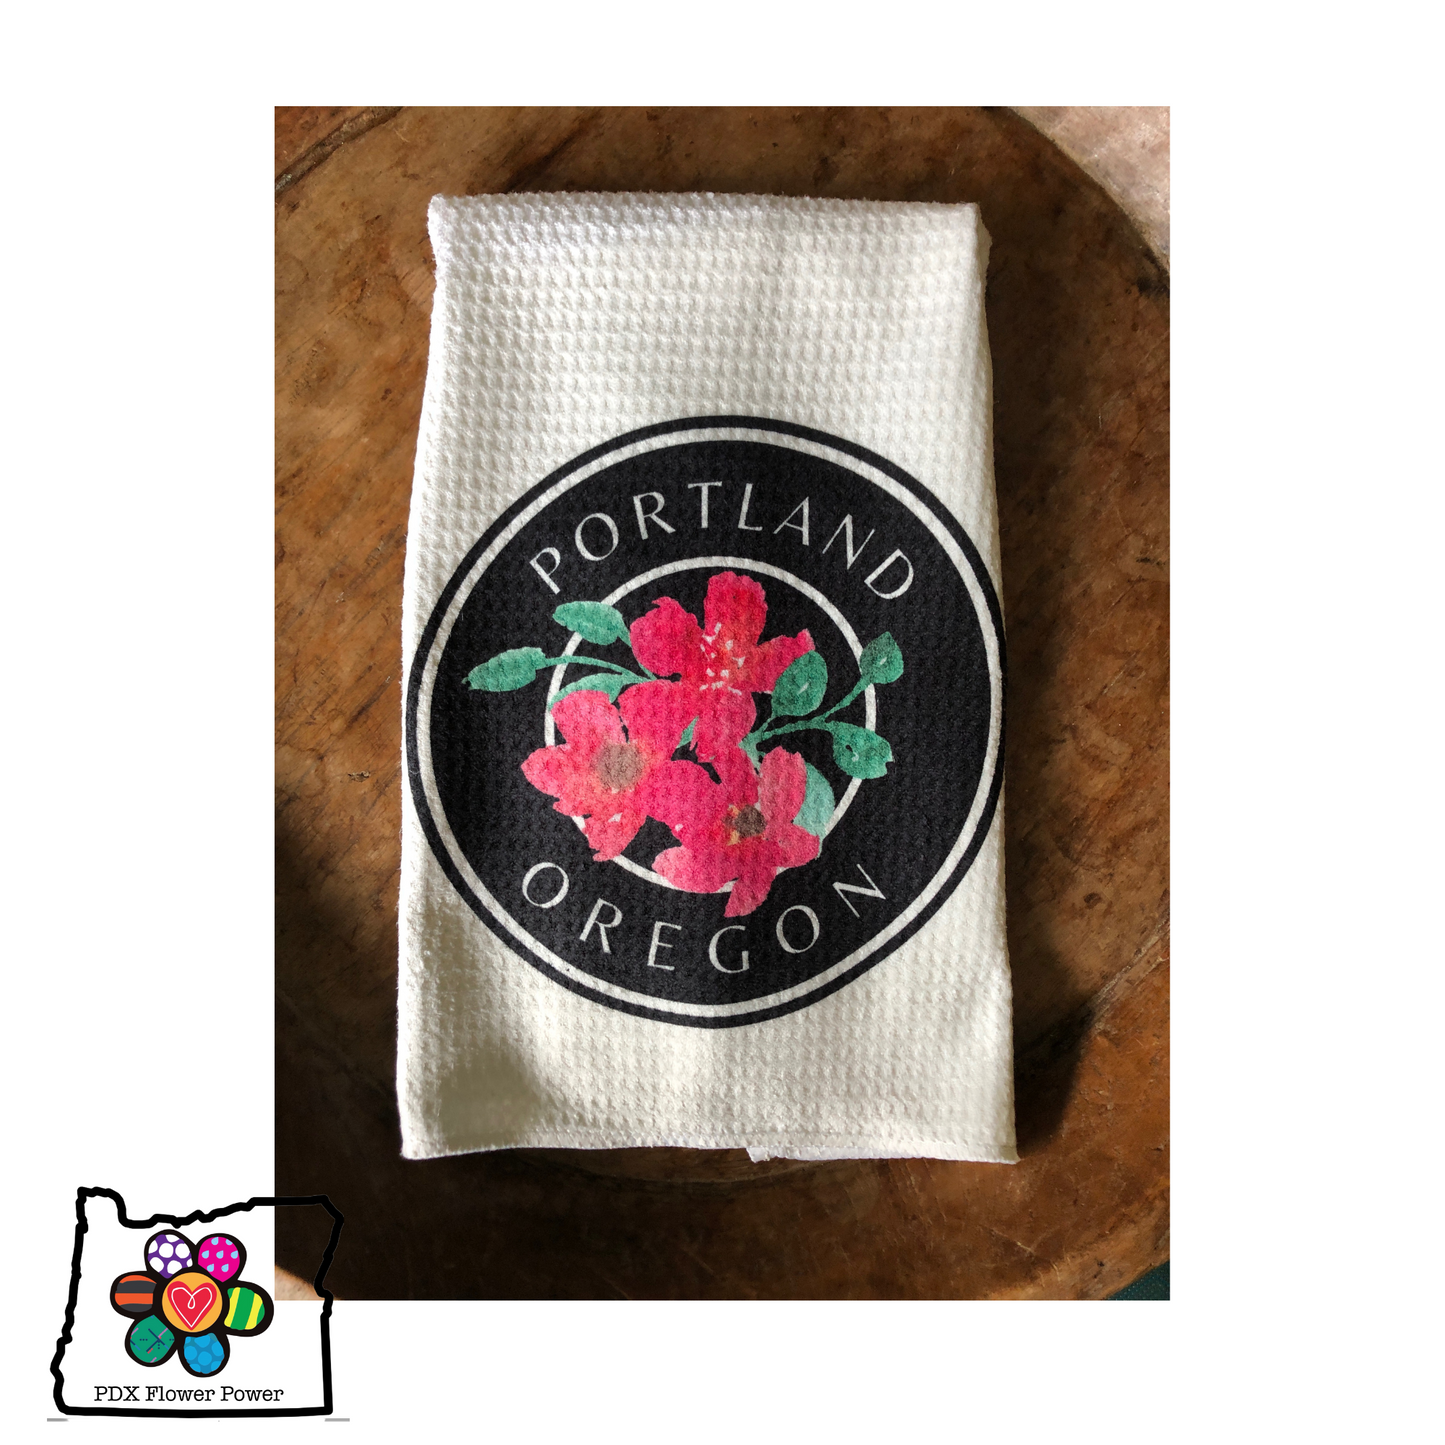 Portland Oregon waffle weave towel, PDX Flower Power designed, printed and pressed.